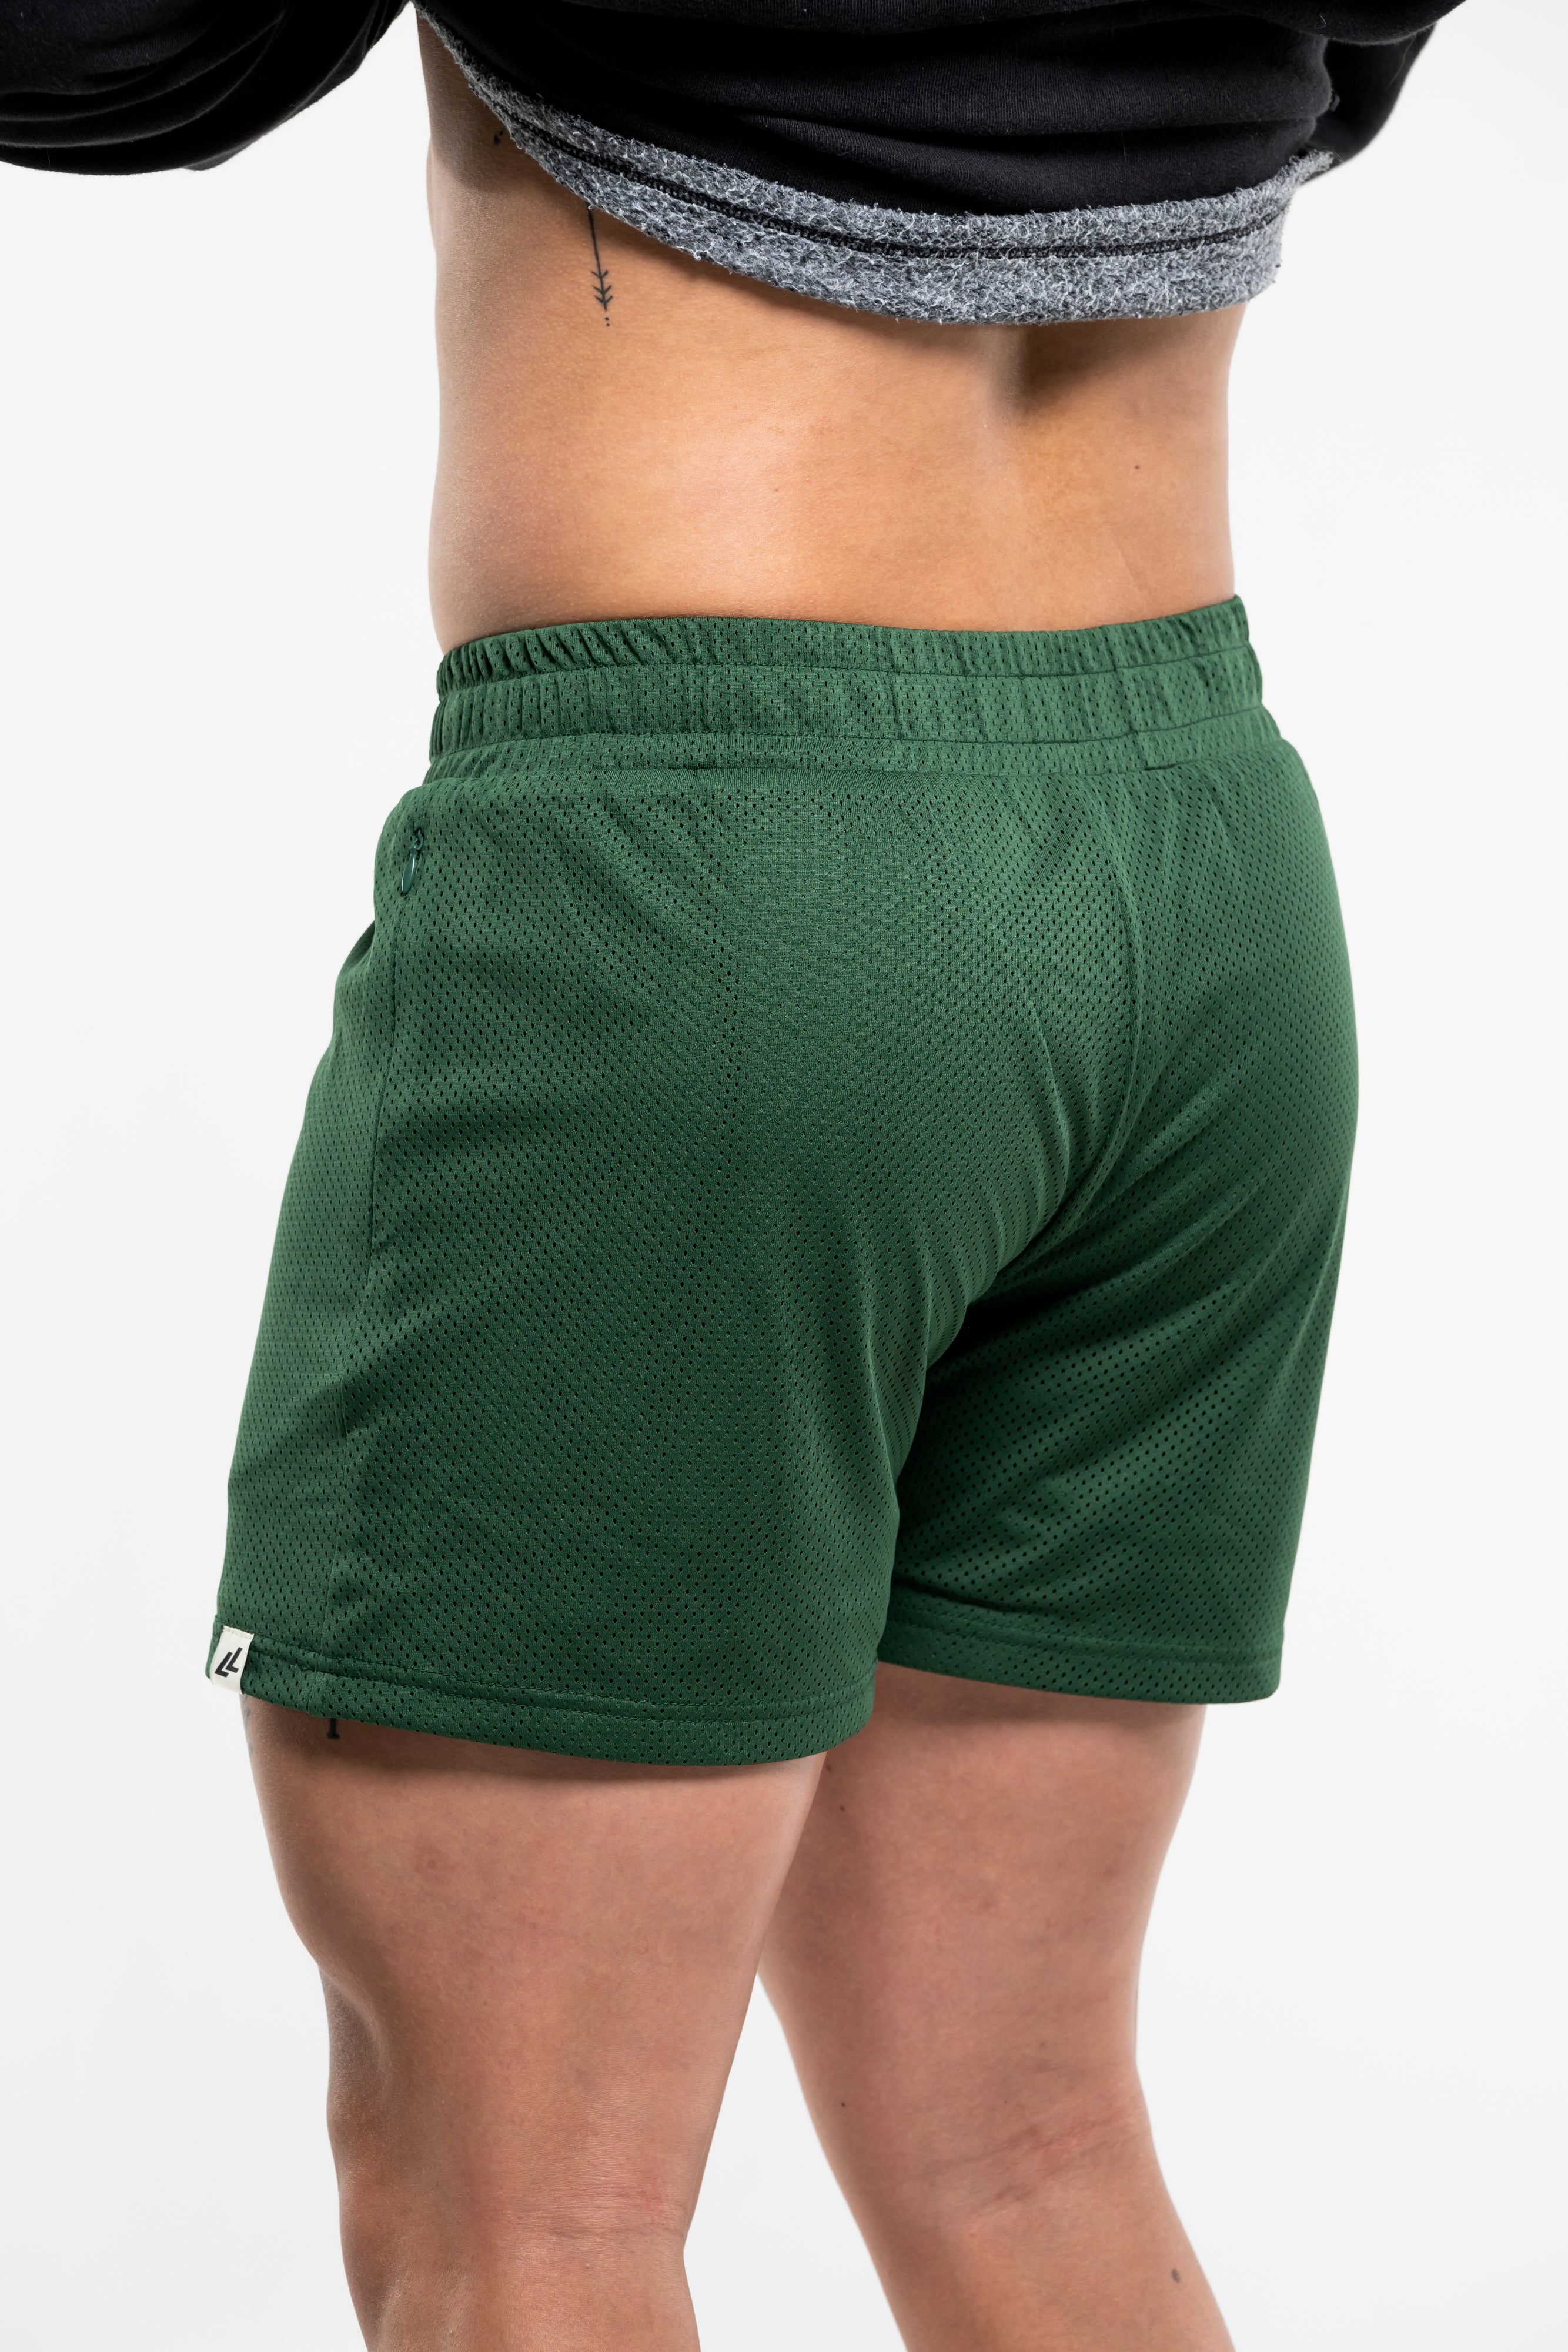 Forest Flexers workout shorts